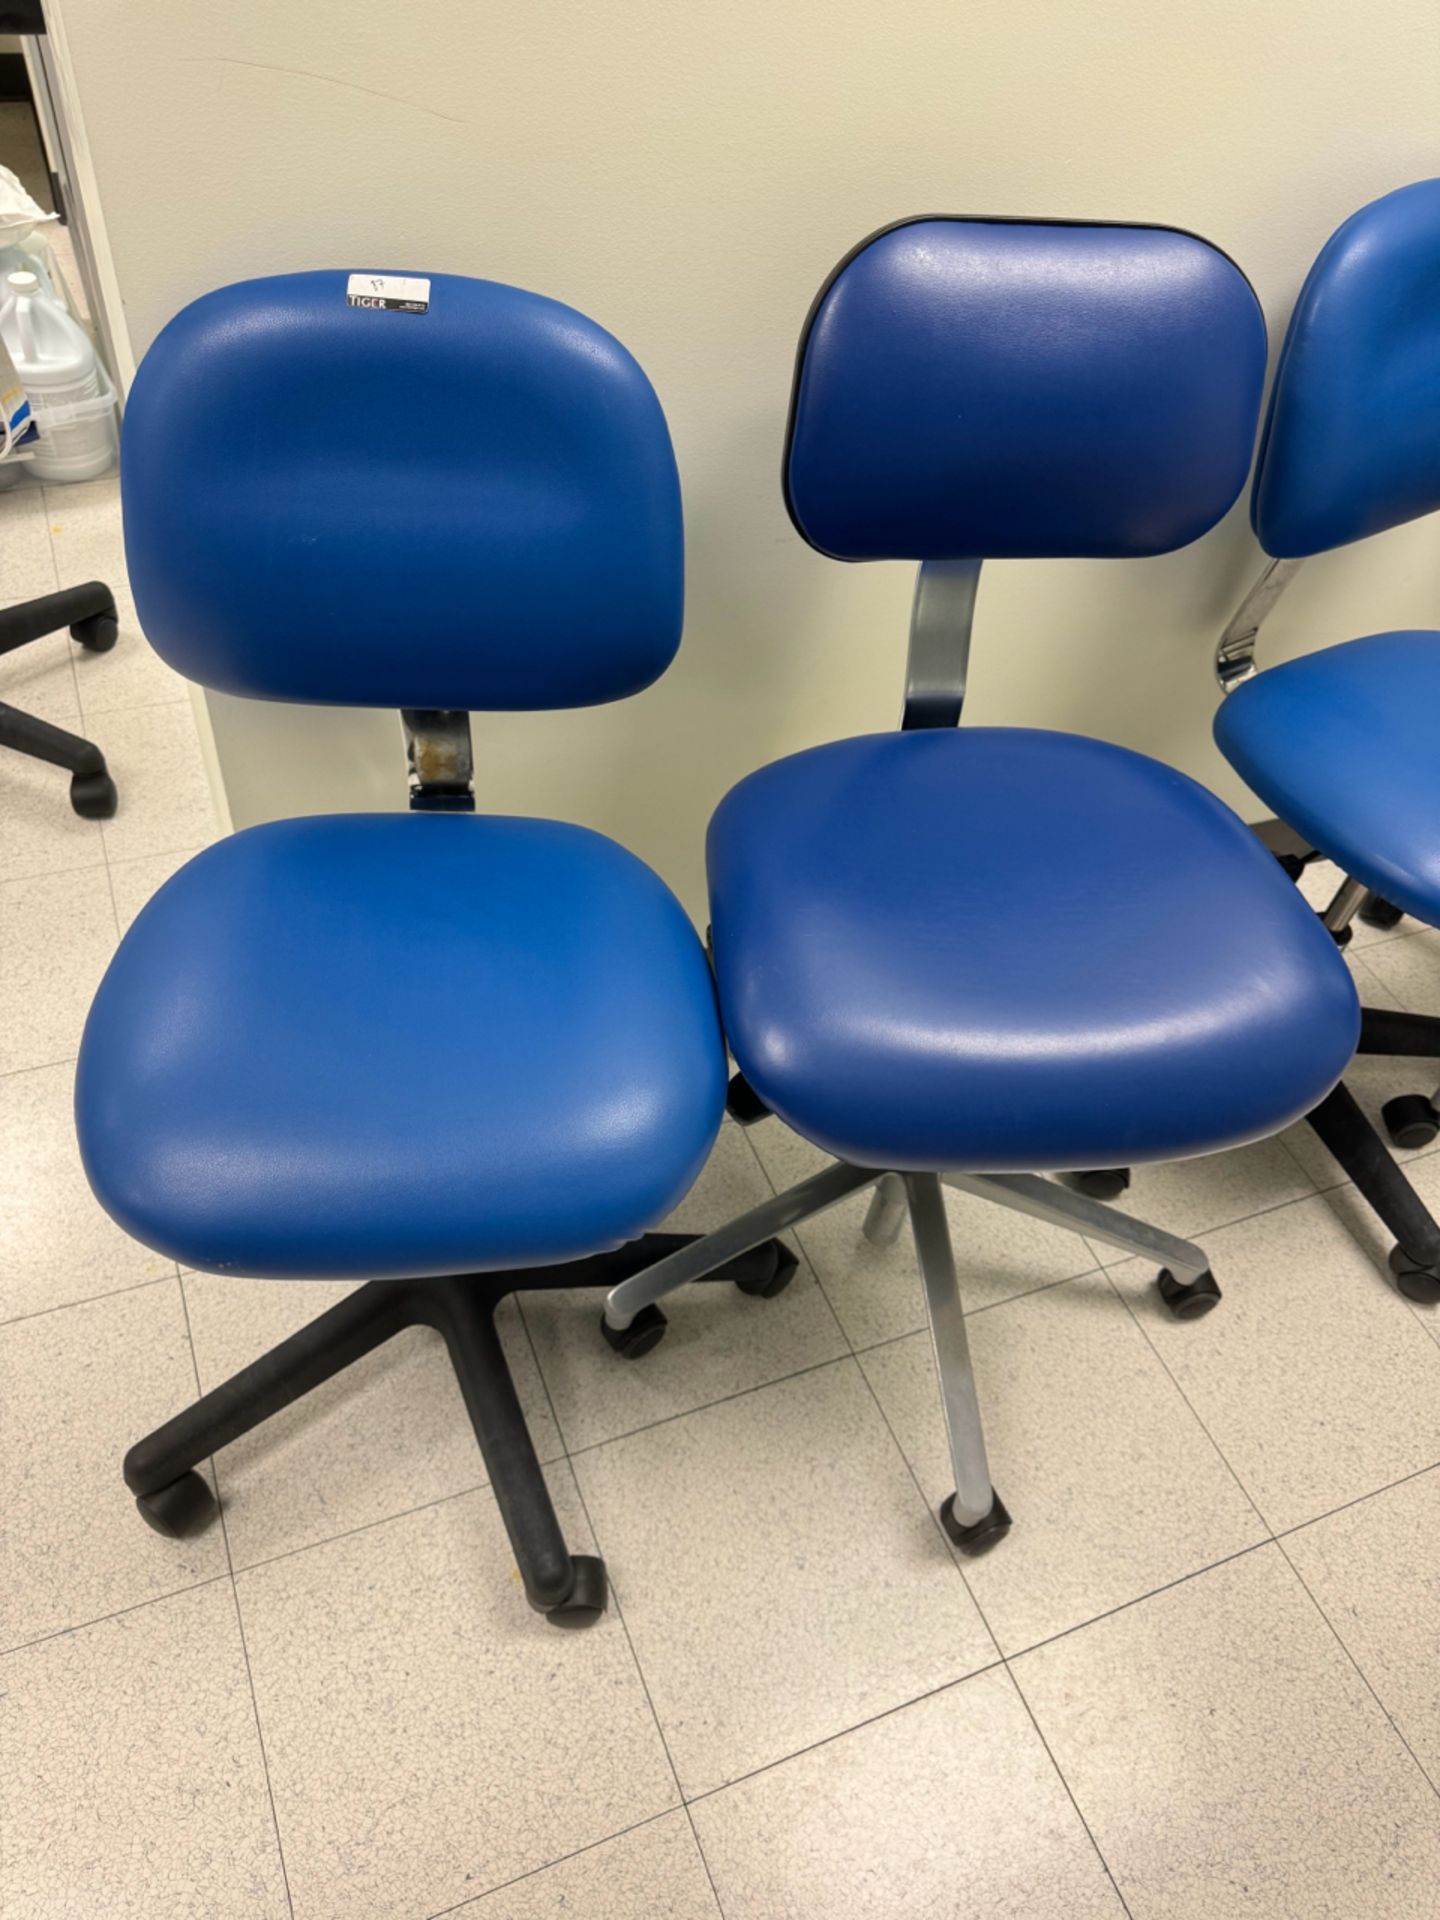 Rolling Lab Chairs - Image 2 of 3